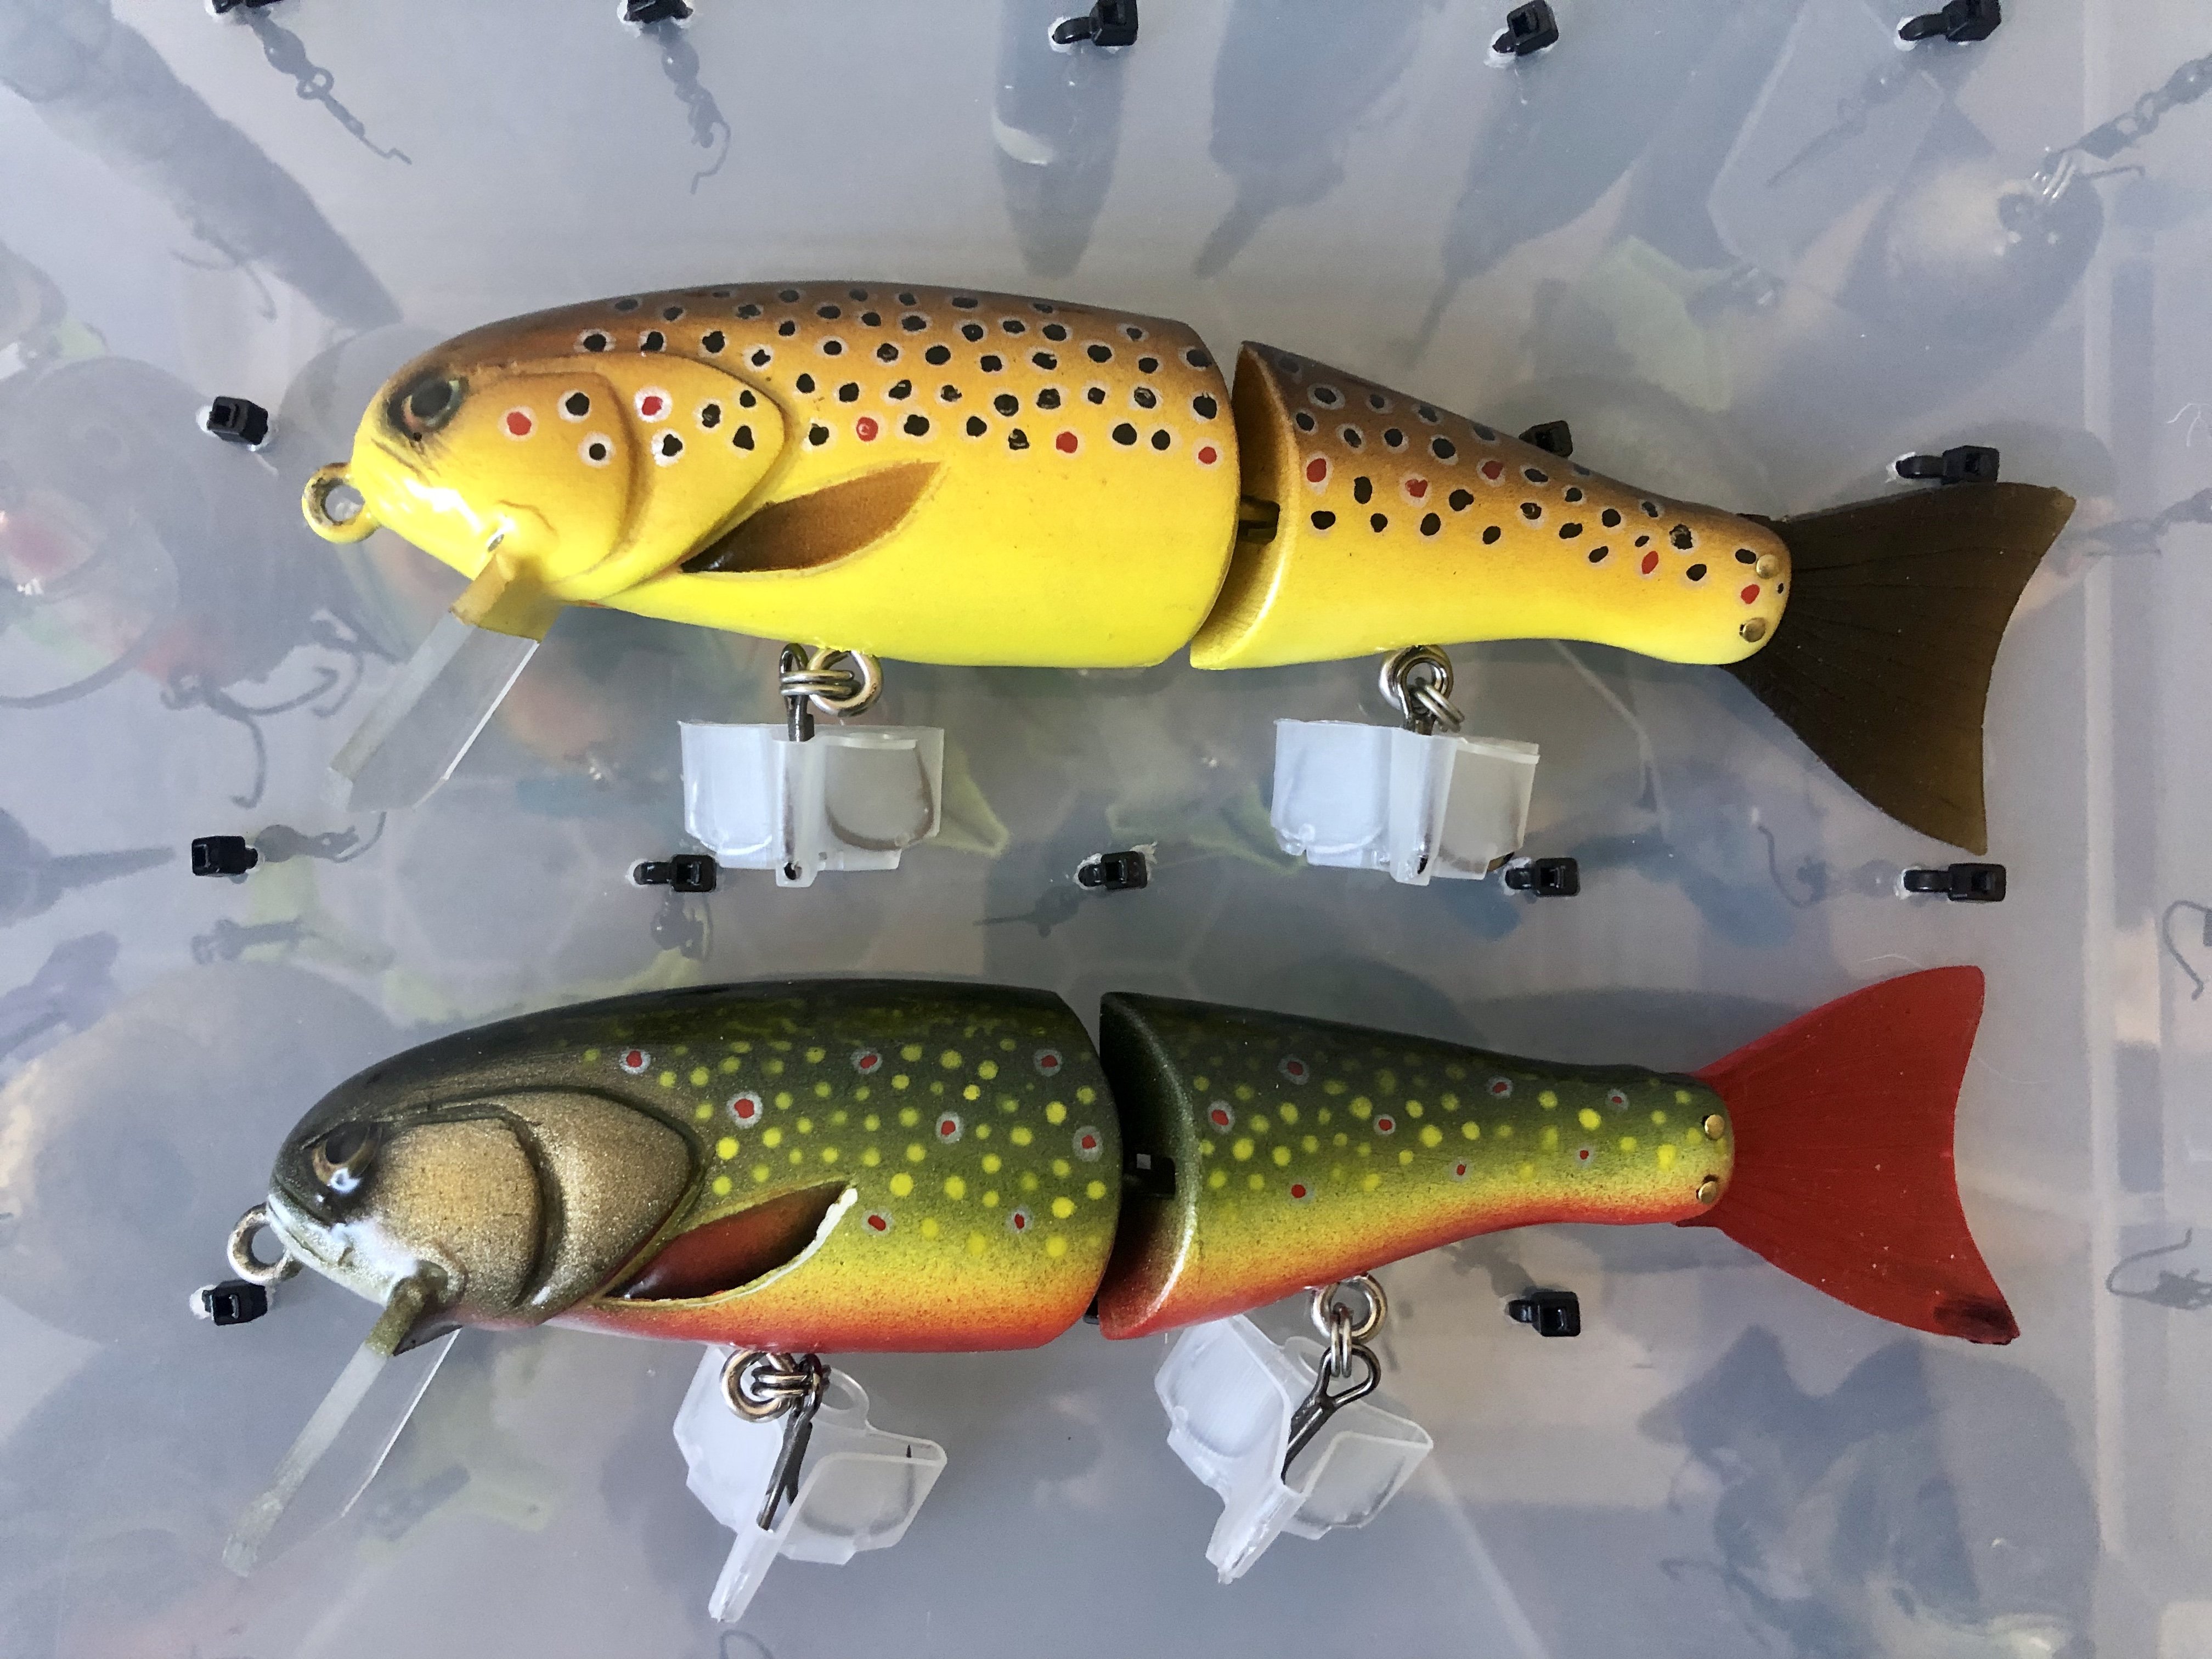 WTT Lanciotti Brown Trout for 3-Piece Psycho or 86 Swimmer - Black